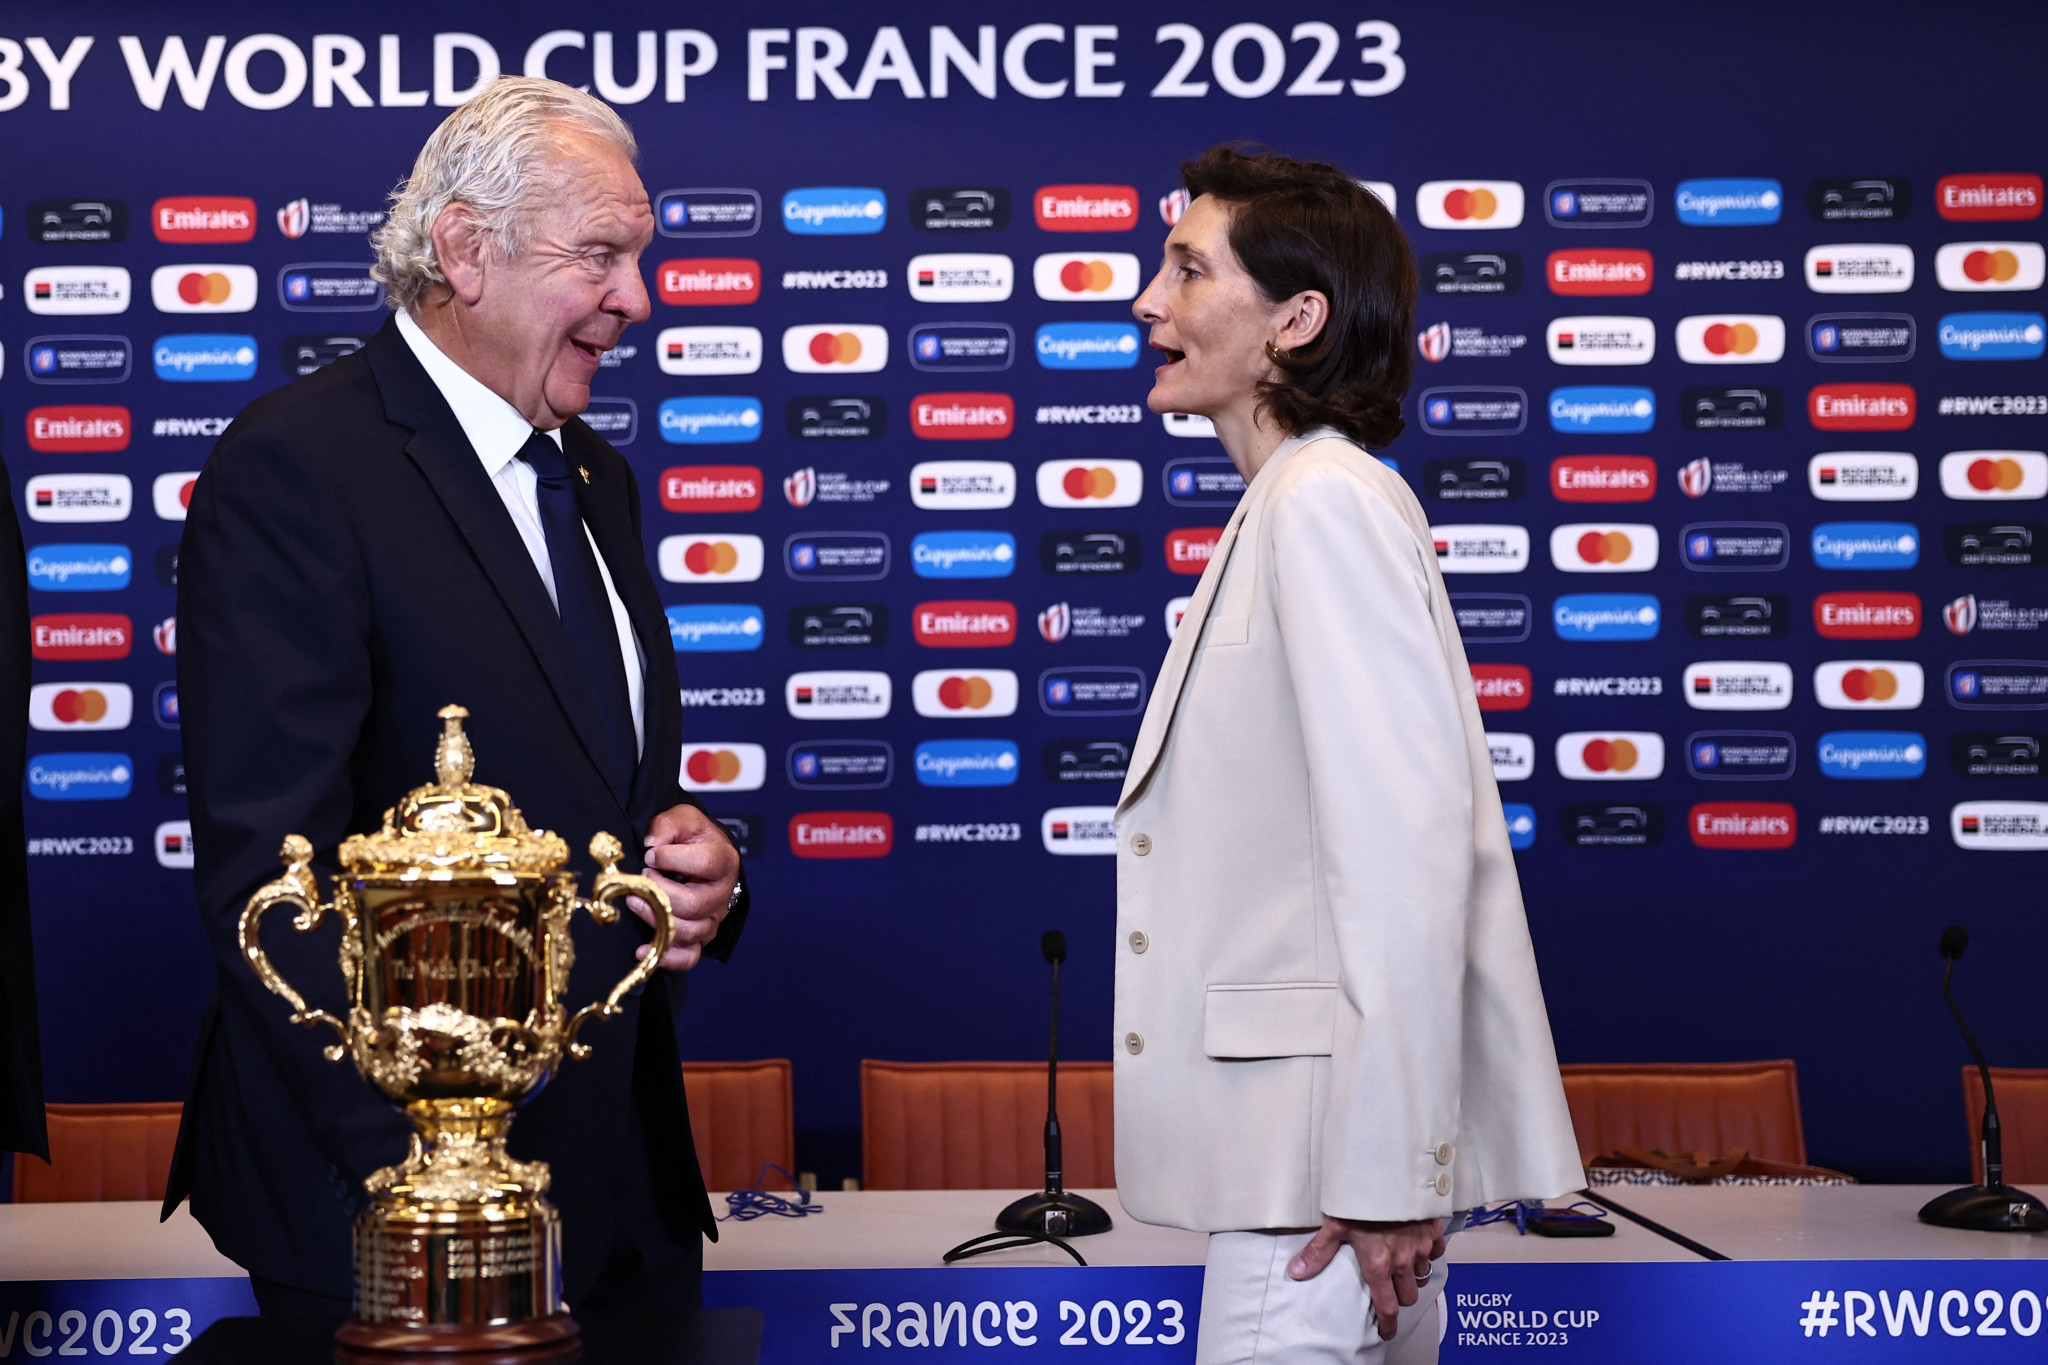 French Sports Minister Amélie Oudéa-Castéra, right, claimed the country has "revised our security policy" following last year's UEFA Champions League final ©Getty Images